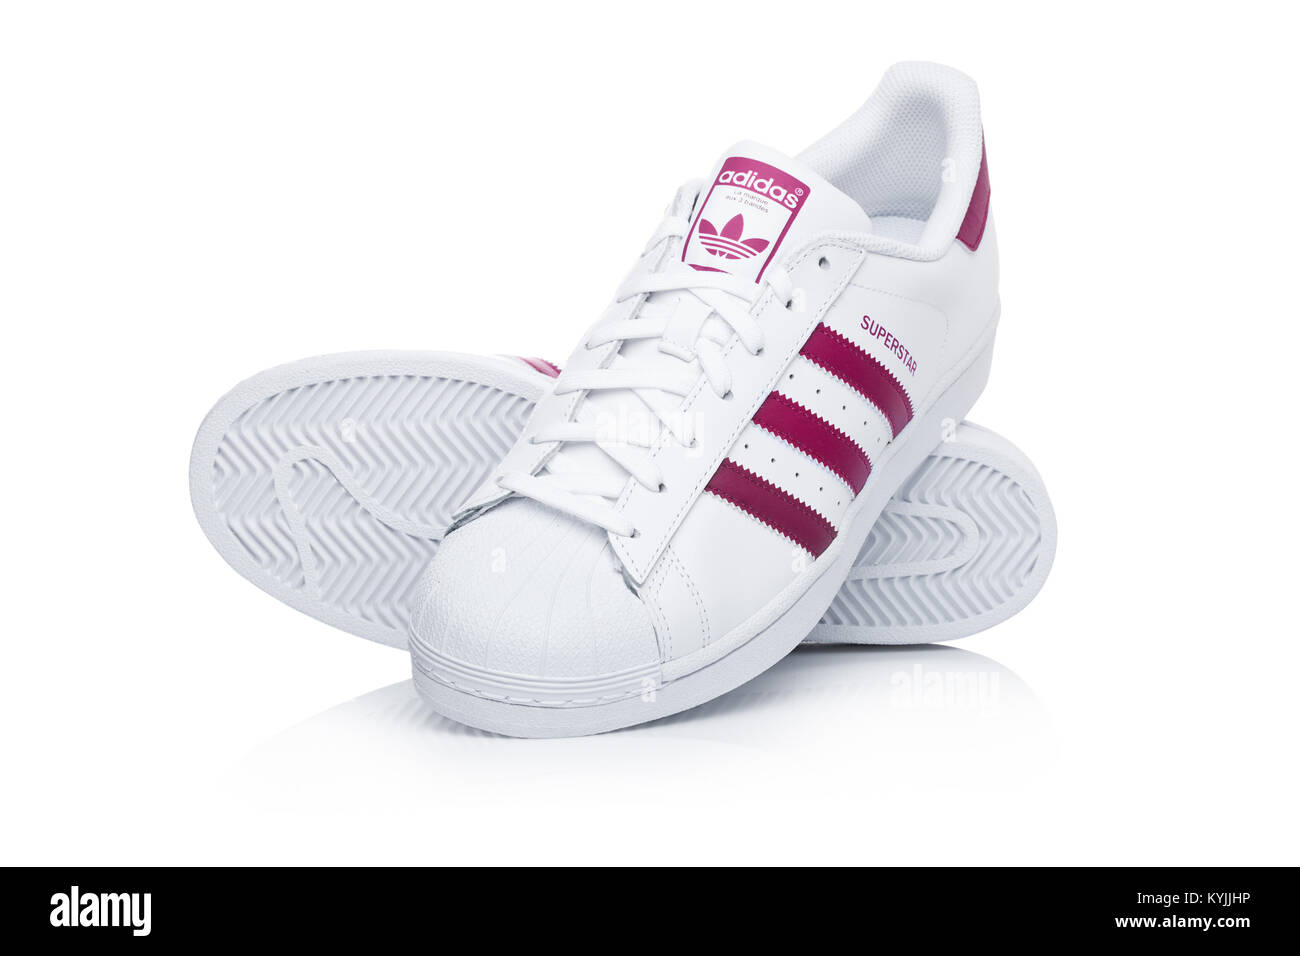 LONDON, UK - JANUARY 12, 2018: Adidas Originals Superstar red shoes on  white background.German multinational corporation that designs and  manufactures Stock Photo - Alamy